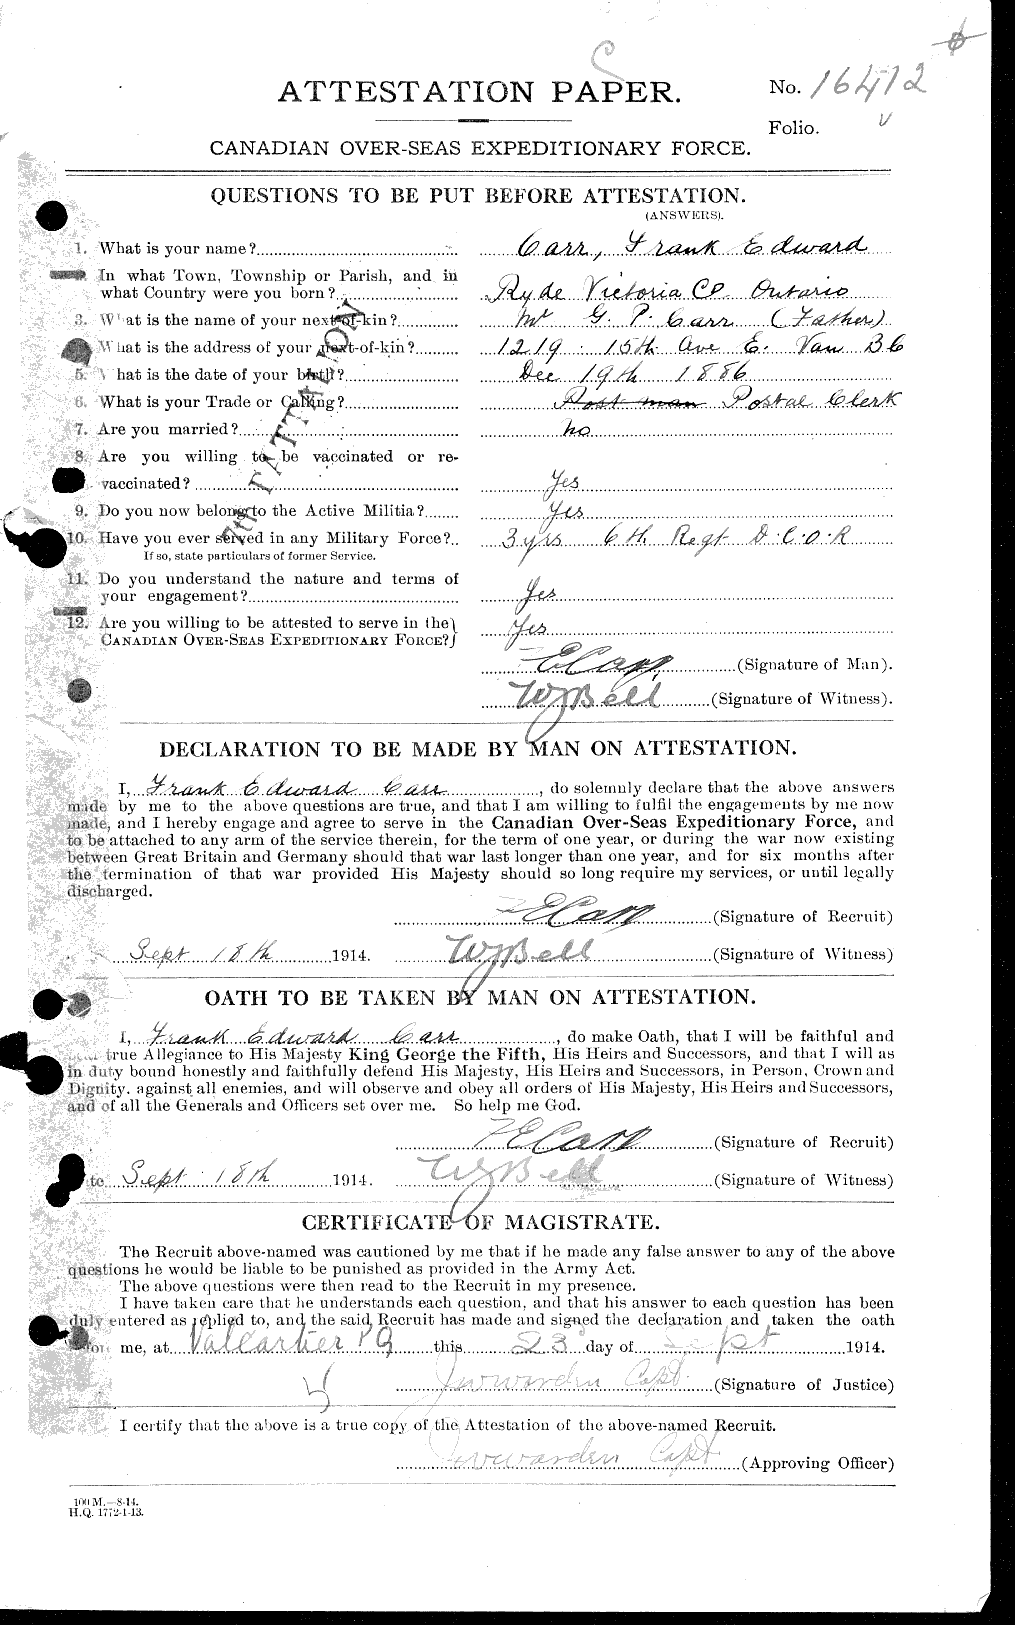 Personnel Records of the First World War - CEF 010256a